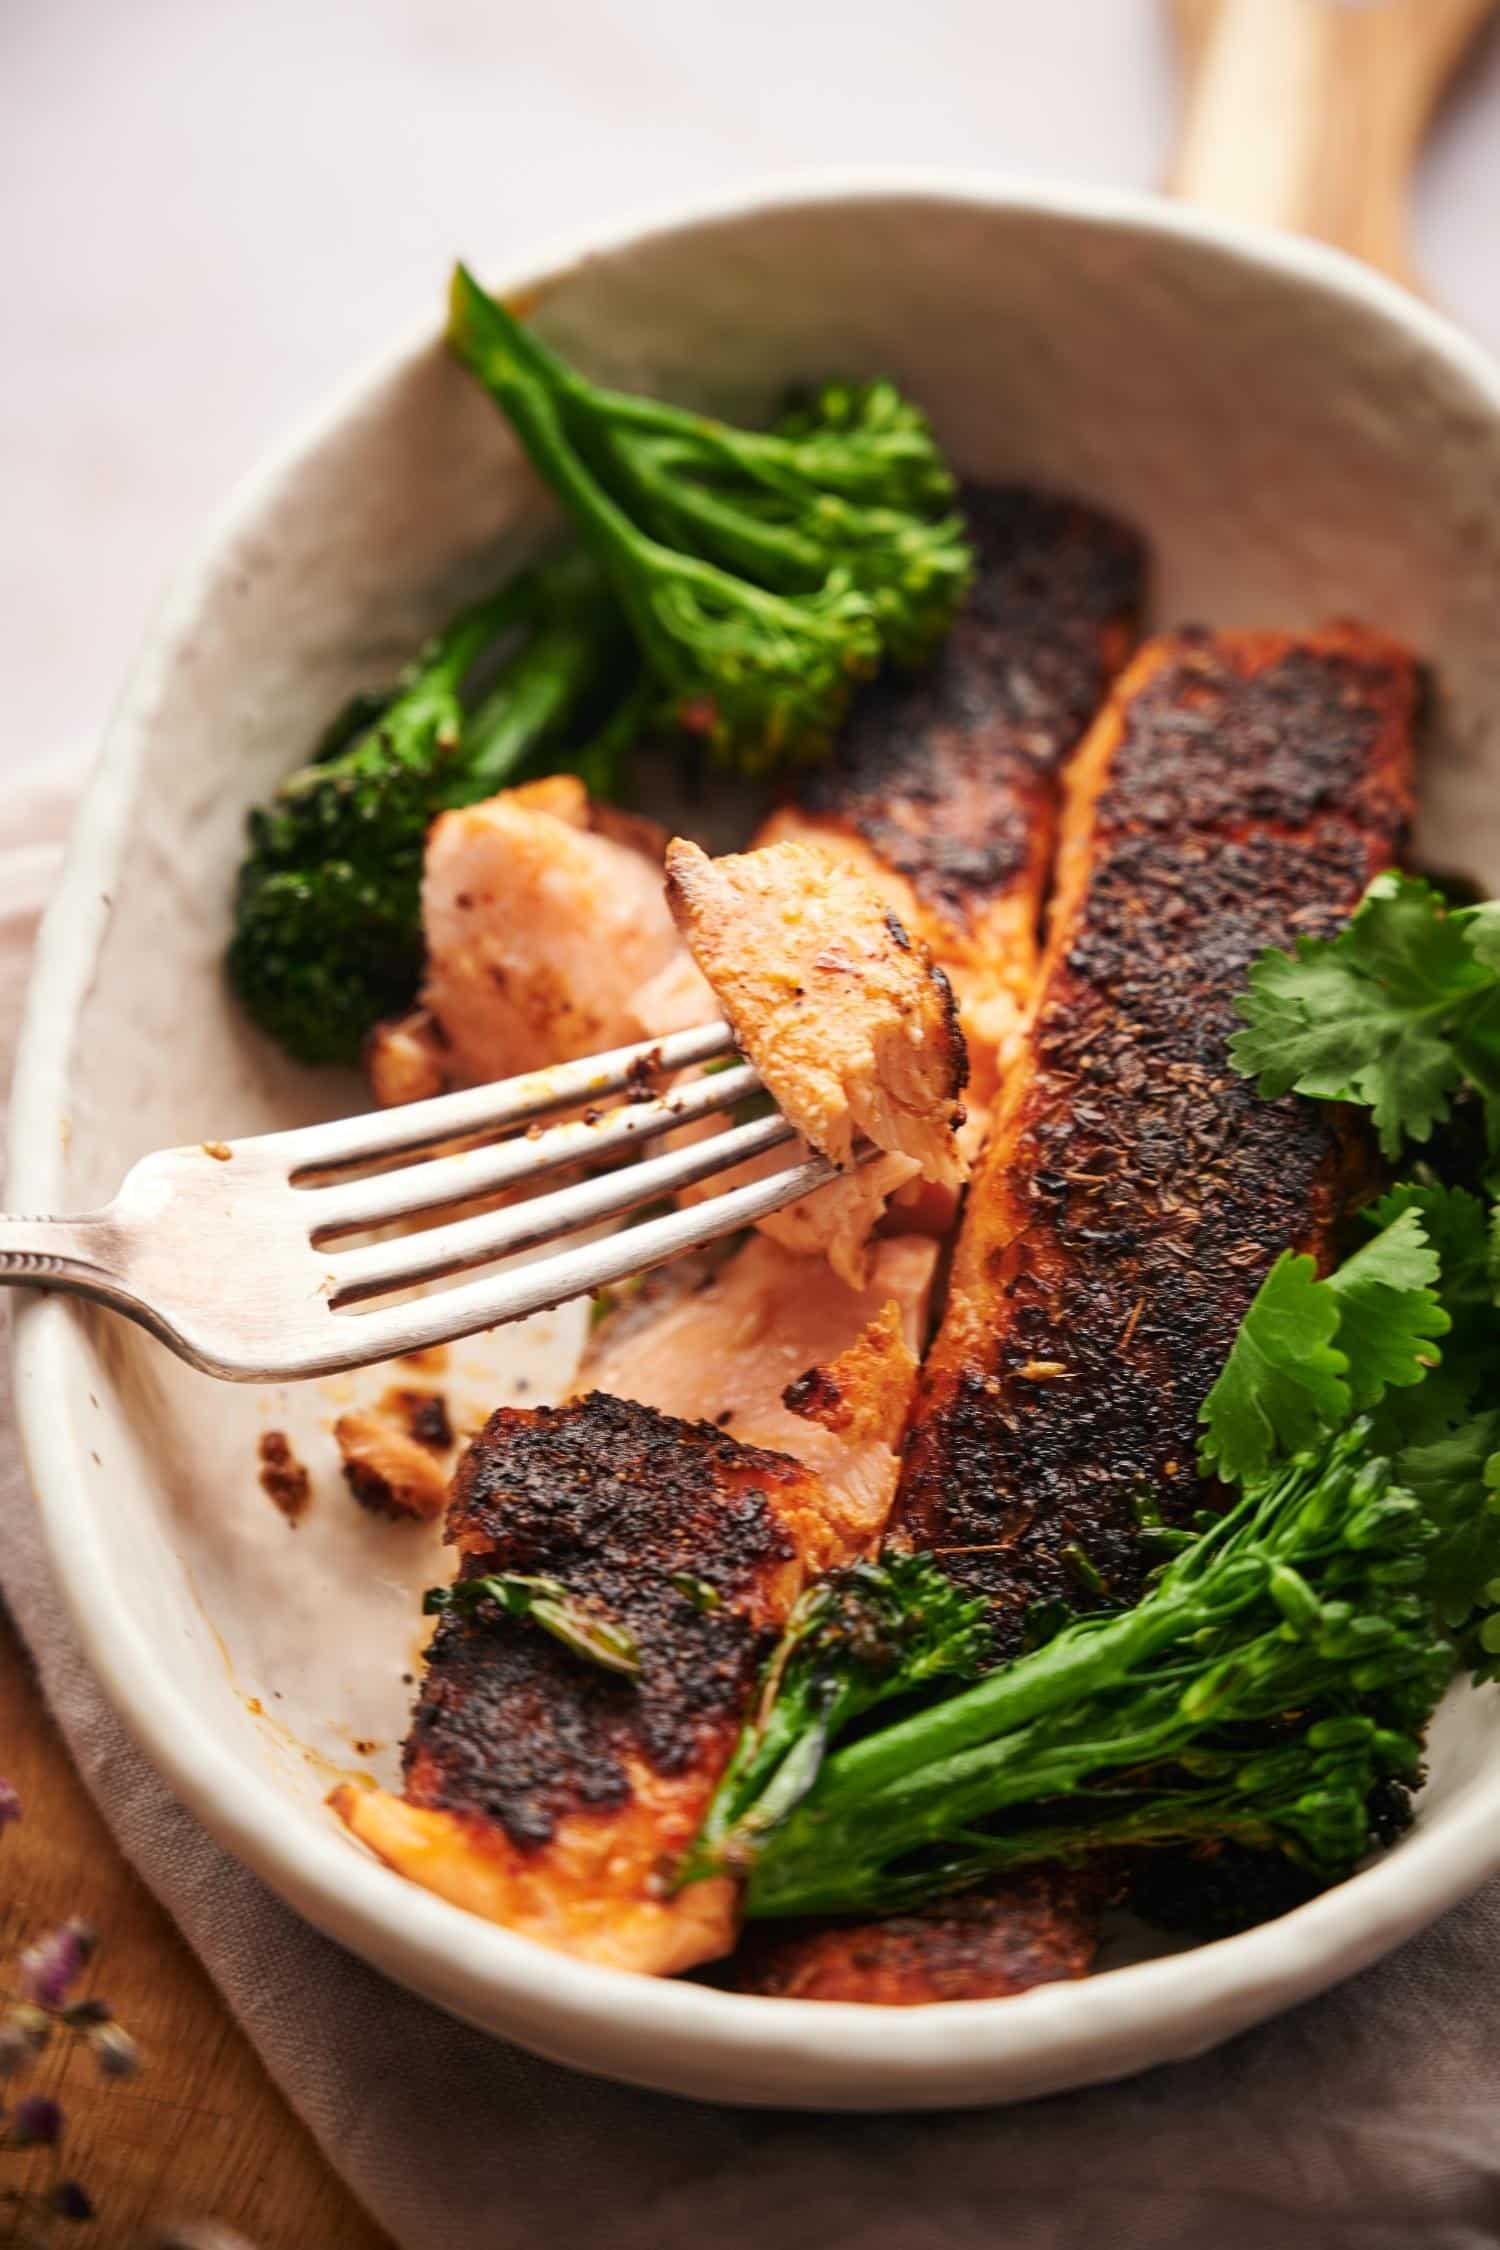 A fork taking a piece of blackened salmon. The salmon is pink and flakey, served in a shallow white bowl with seared broccolini and fresh cilantro for garnish.